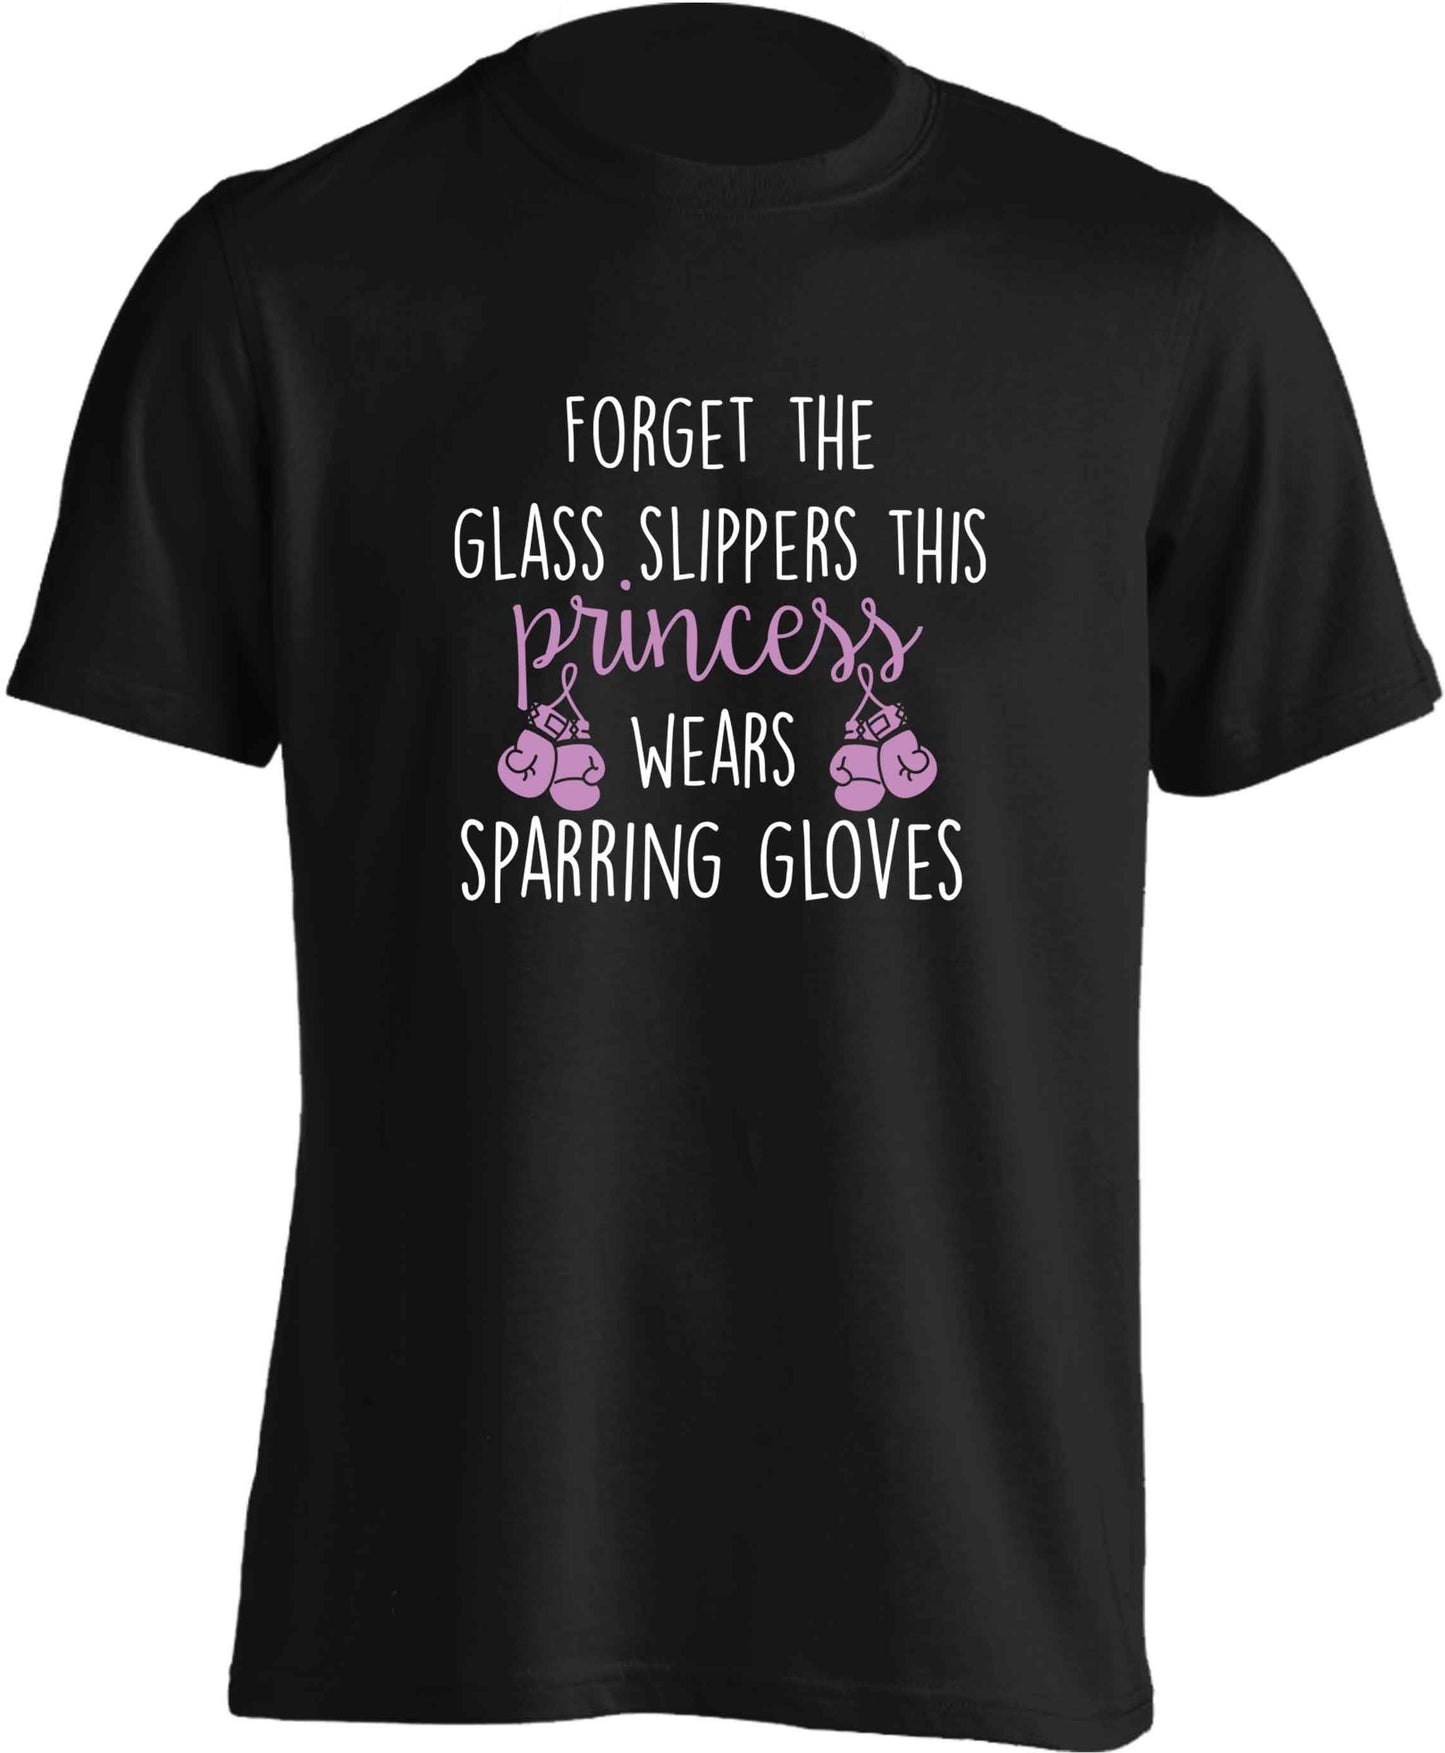 Forget the glass slippers this princess wears sparring gloves adults unisex black Tshirt 2XL